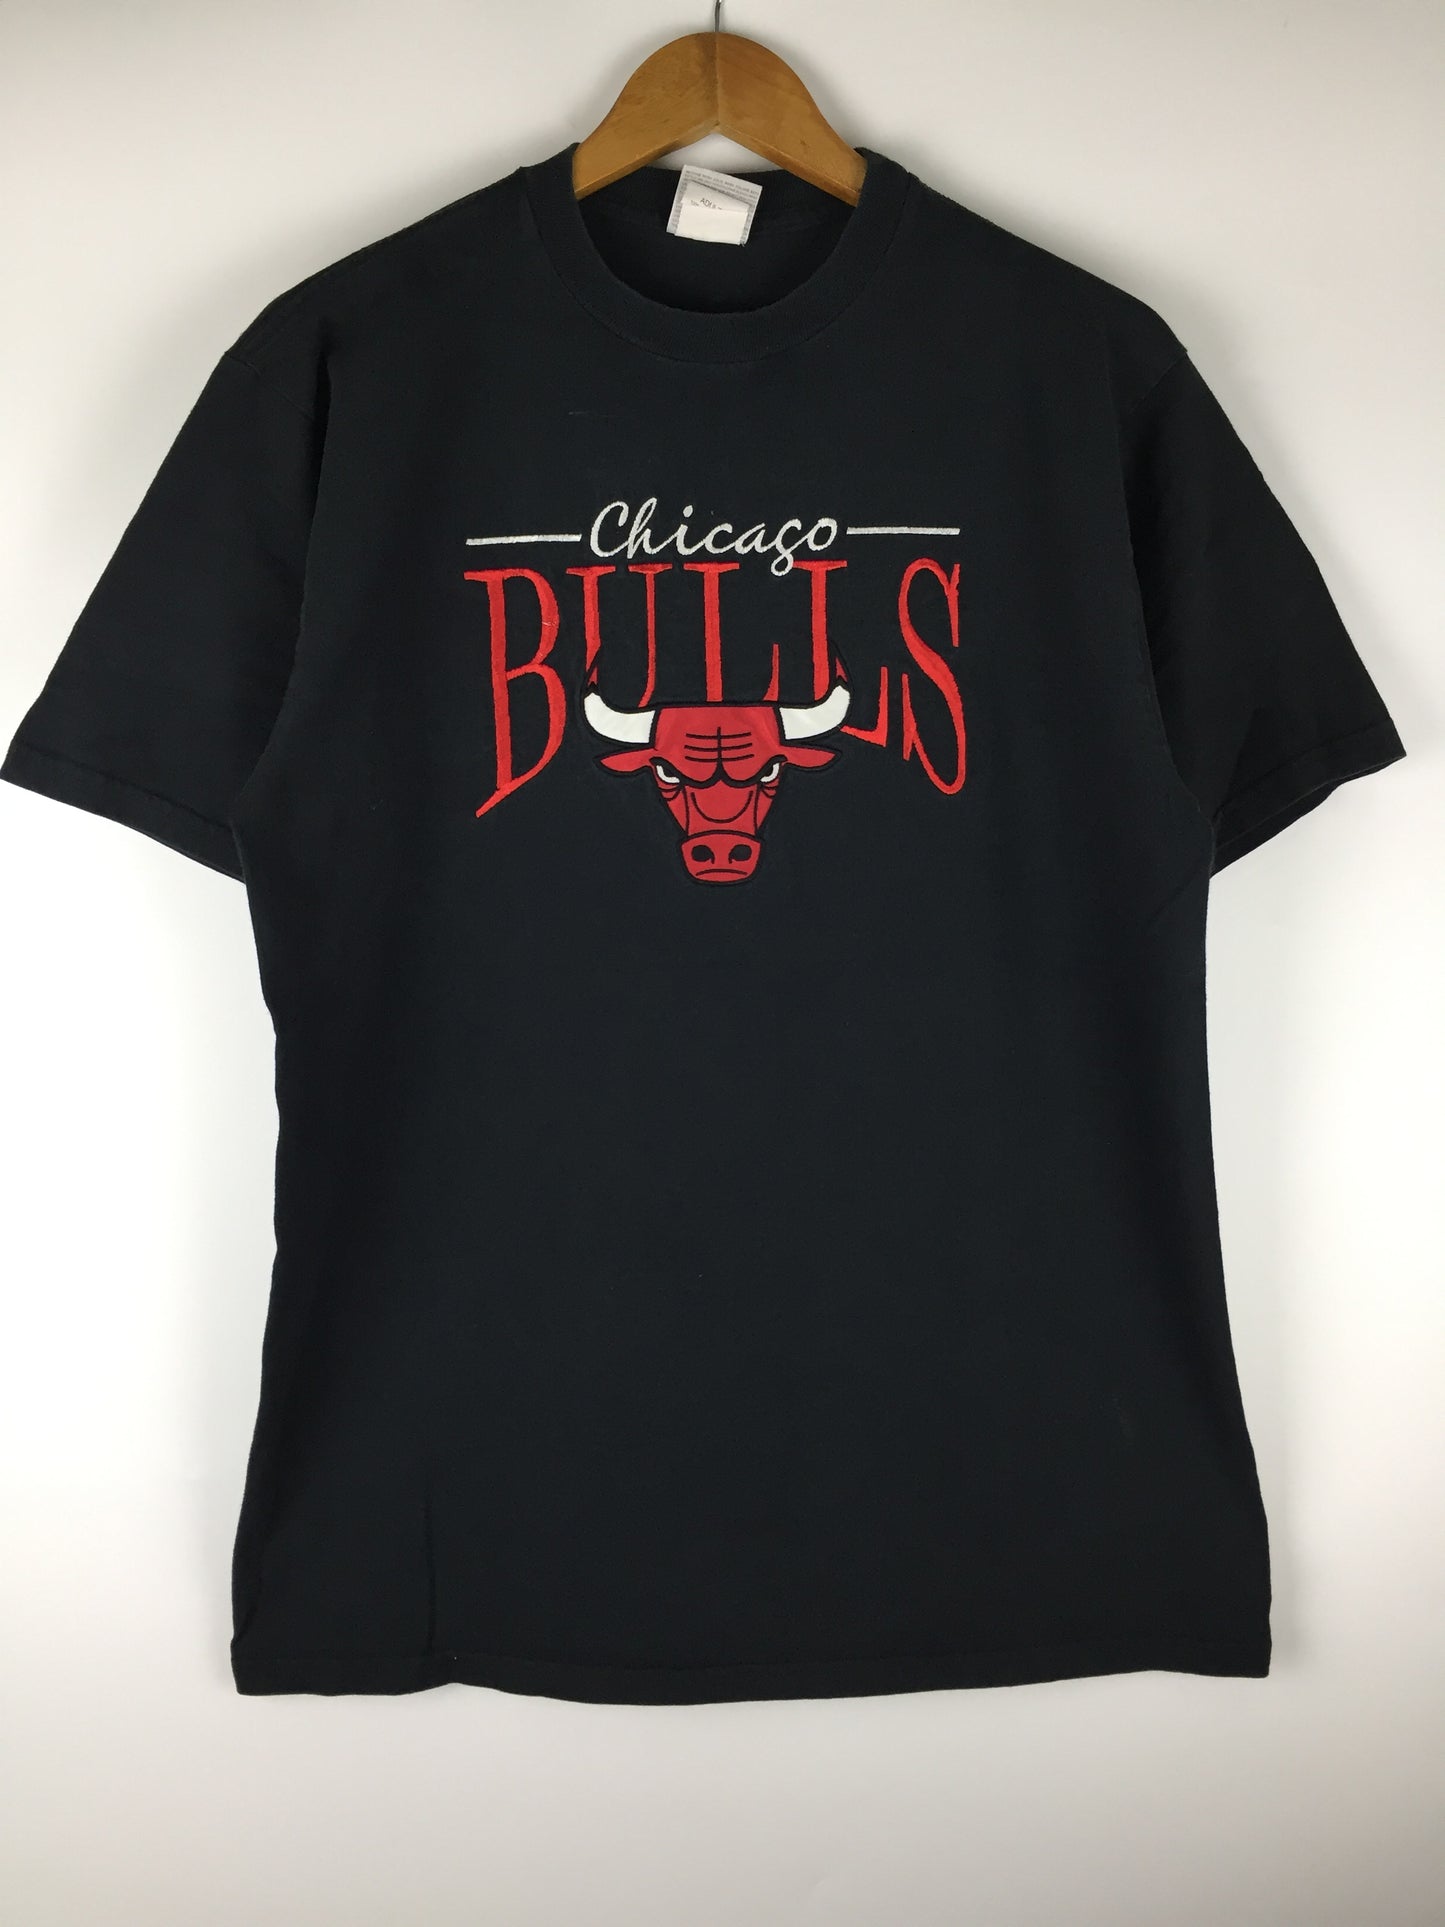 Vintage Chicago Bulls 90's embroidered NBA T-shirt